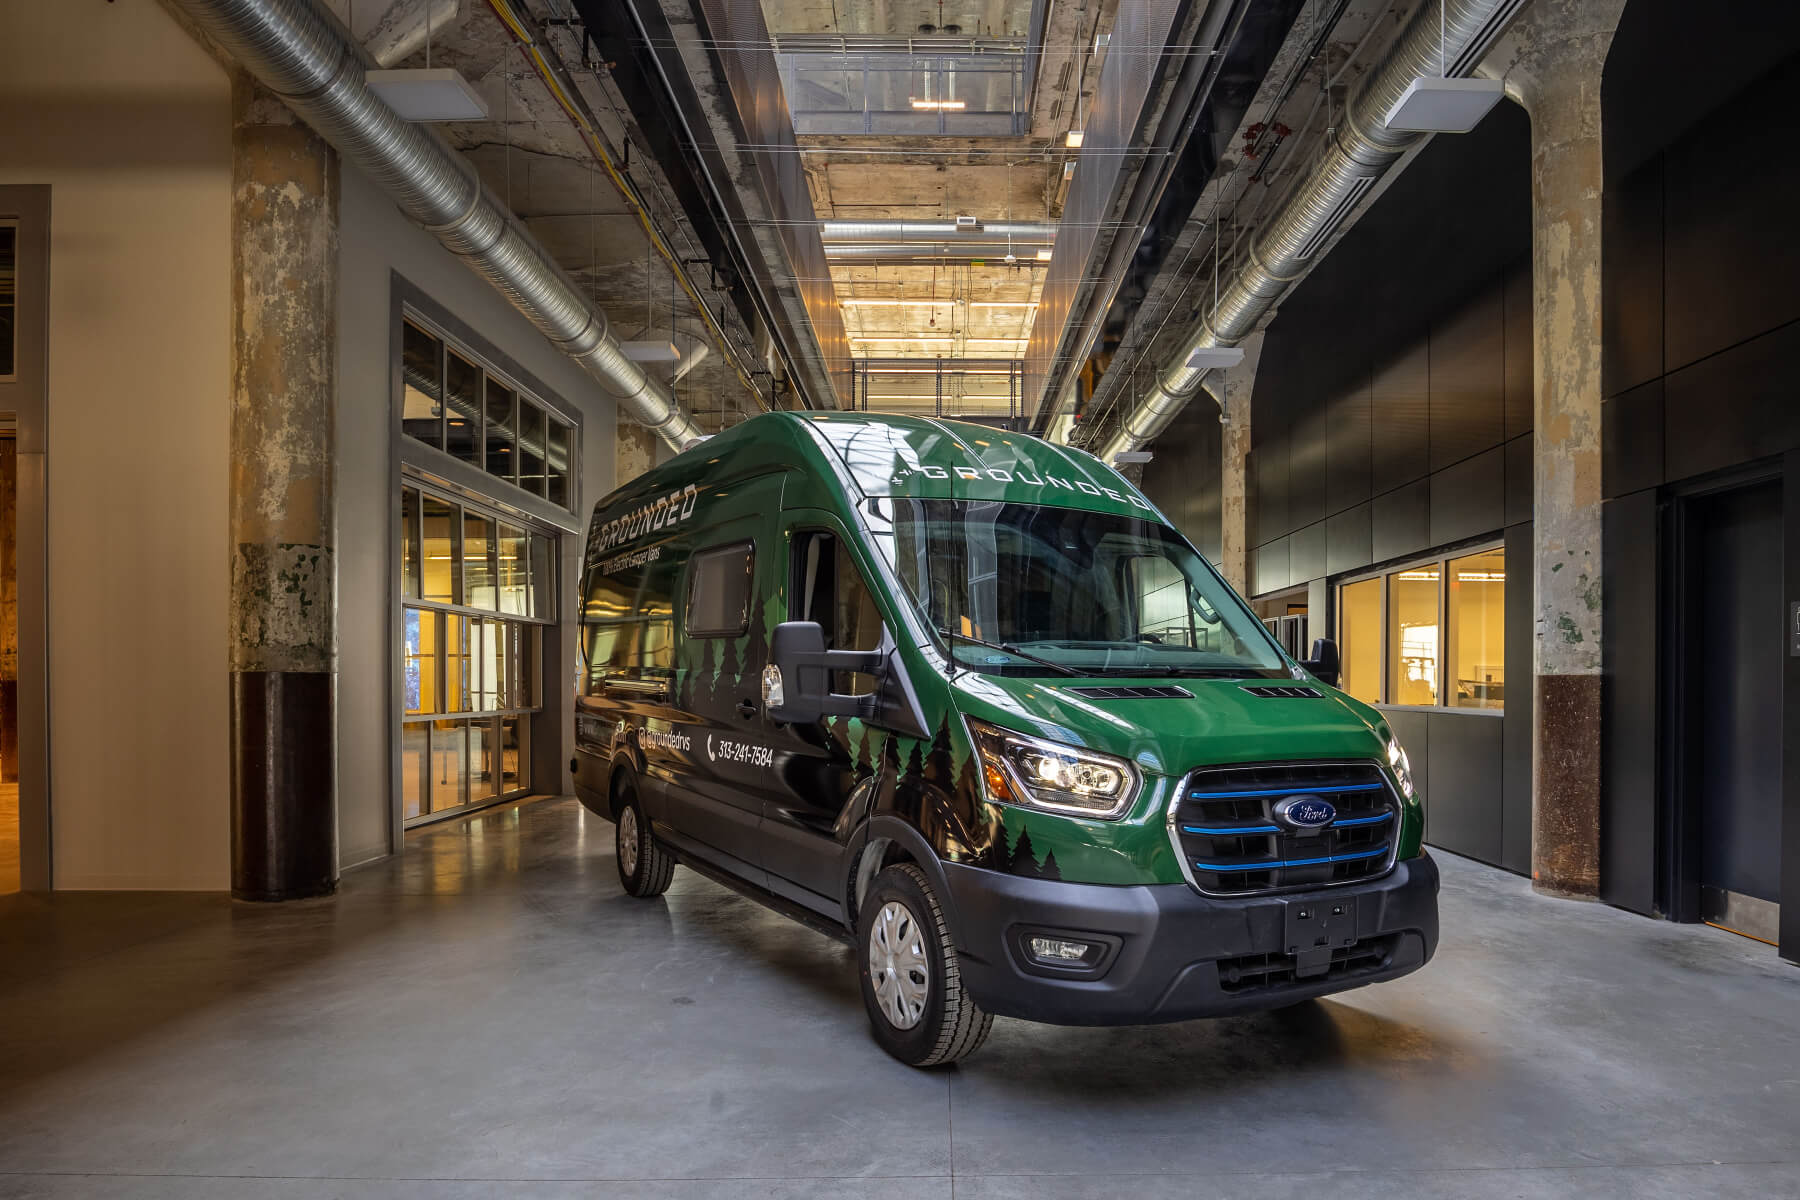 A head-on view of the new Grounded G1 electric camper conversion van.